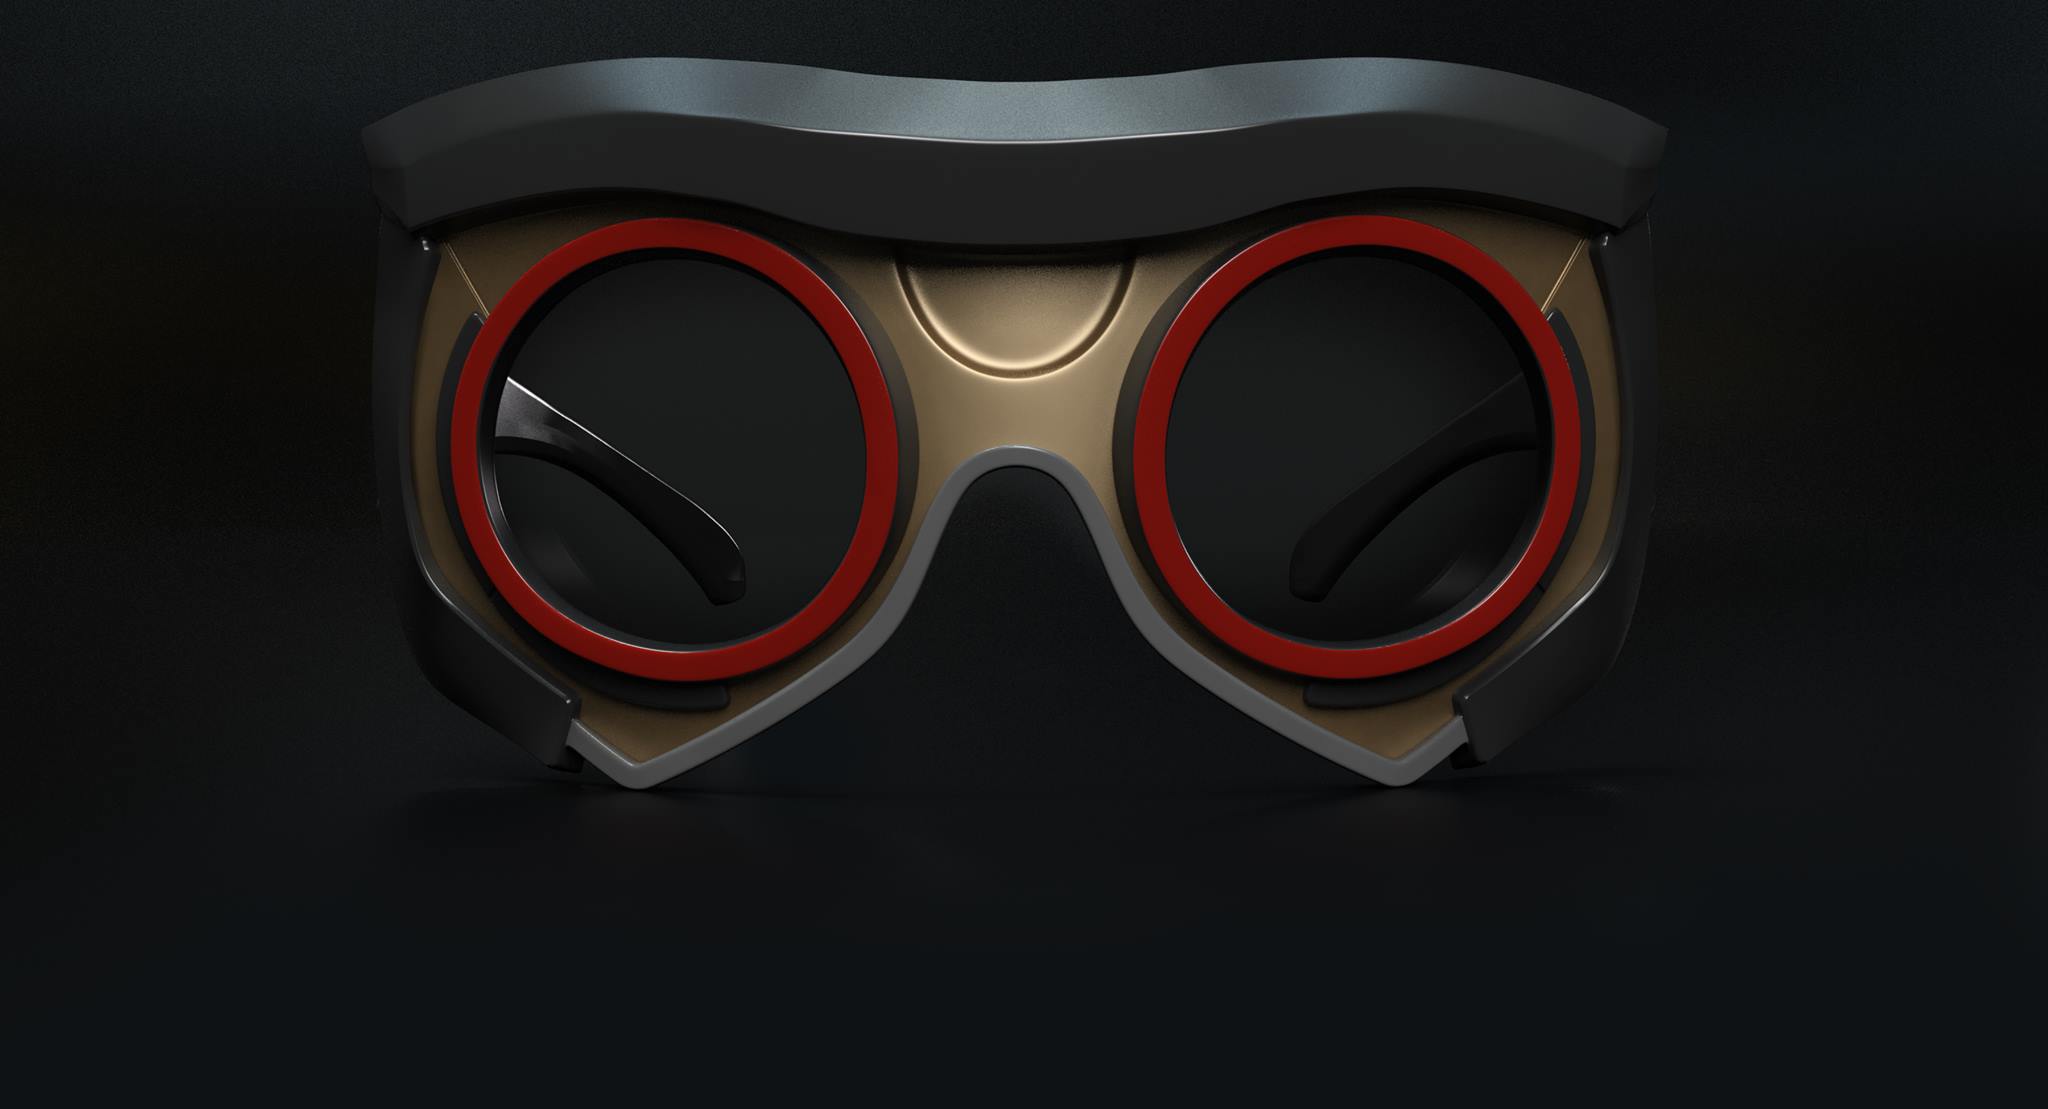 Guardians of the Galaxy 2 RealD 3D Glasses Revealed - Cosmic Book News2048 x 1109